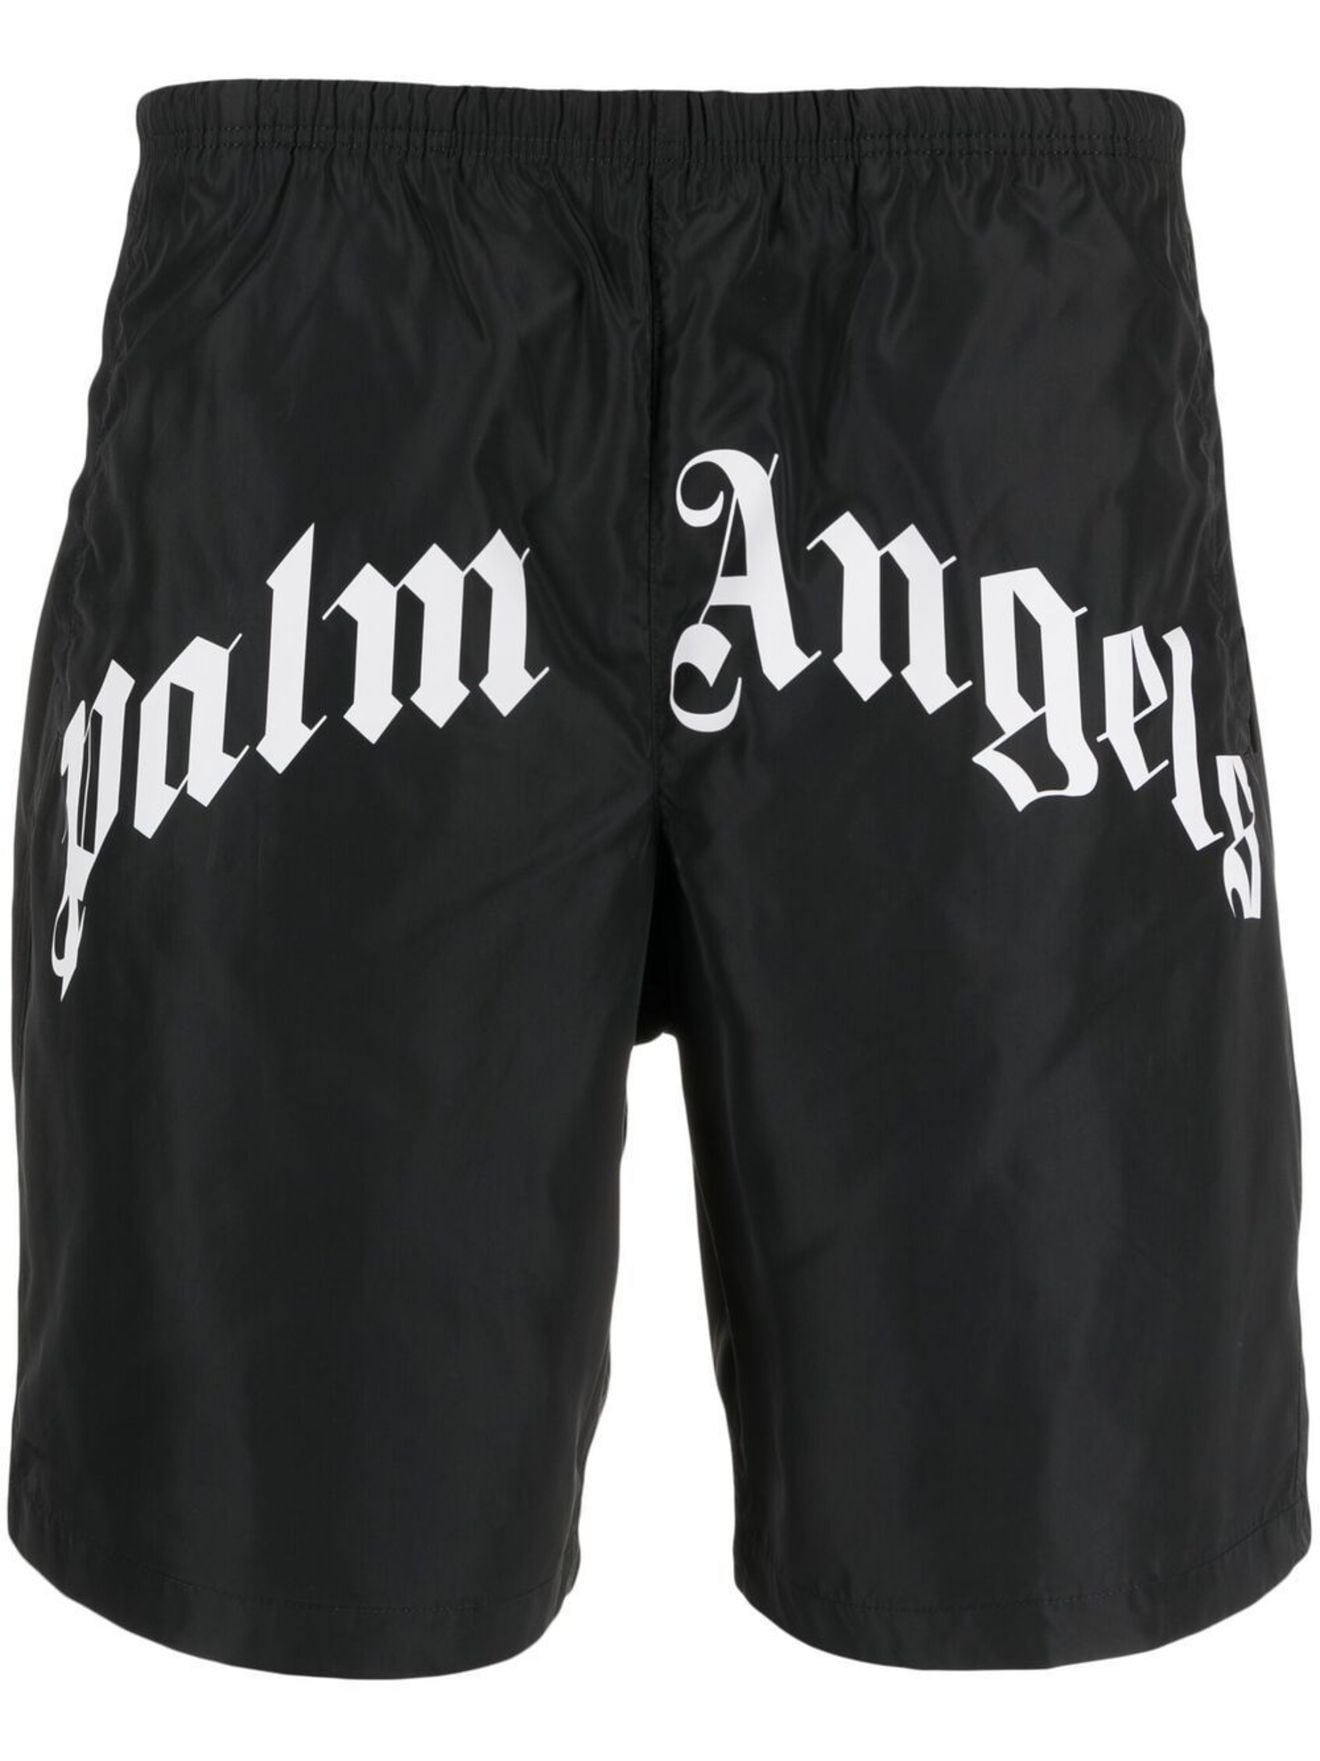 Palm Angels curved logo swimming shorts black | MODES